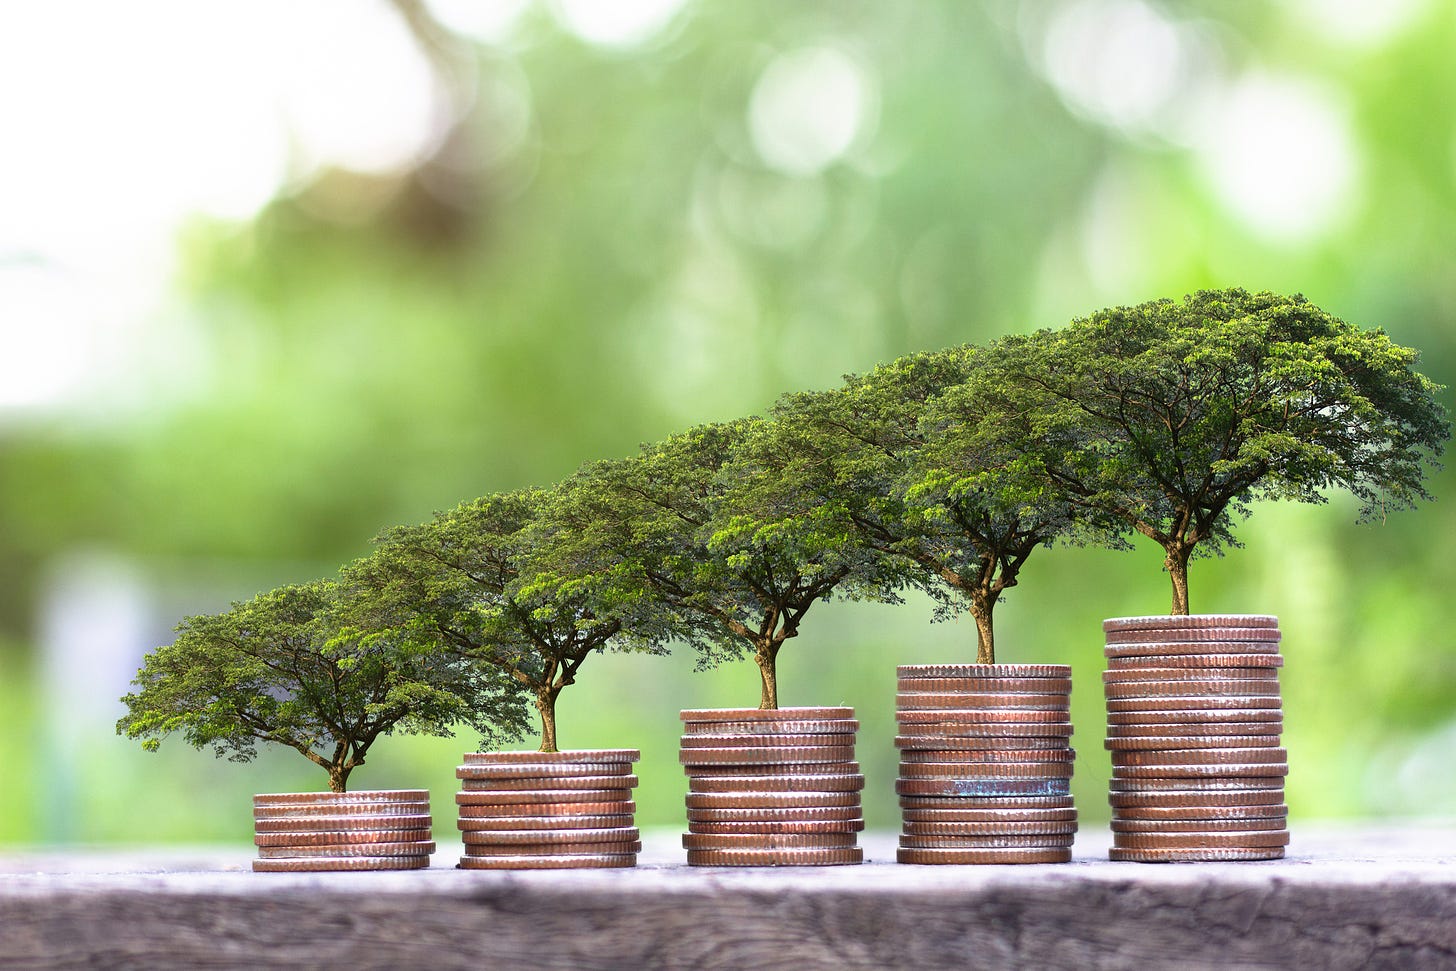 ESG investing is on the rise – but greenwashing could be too